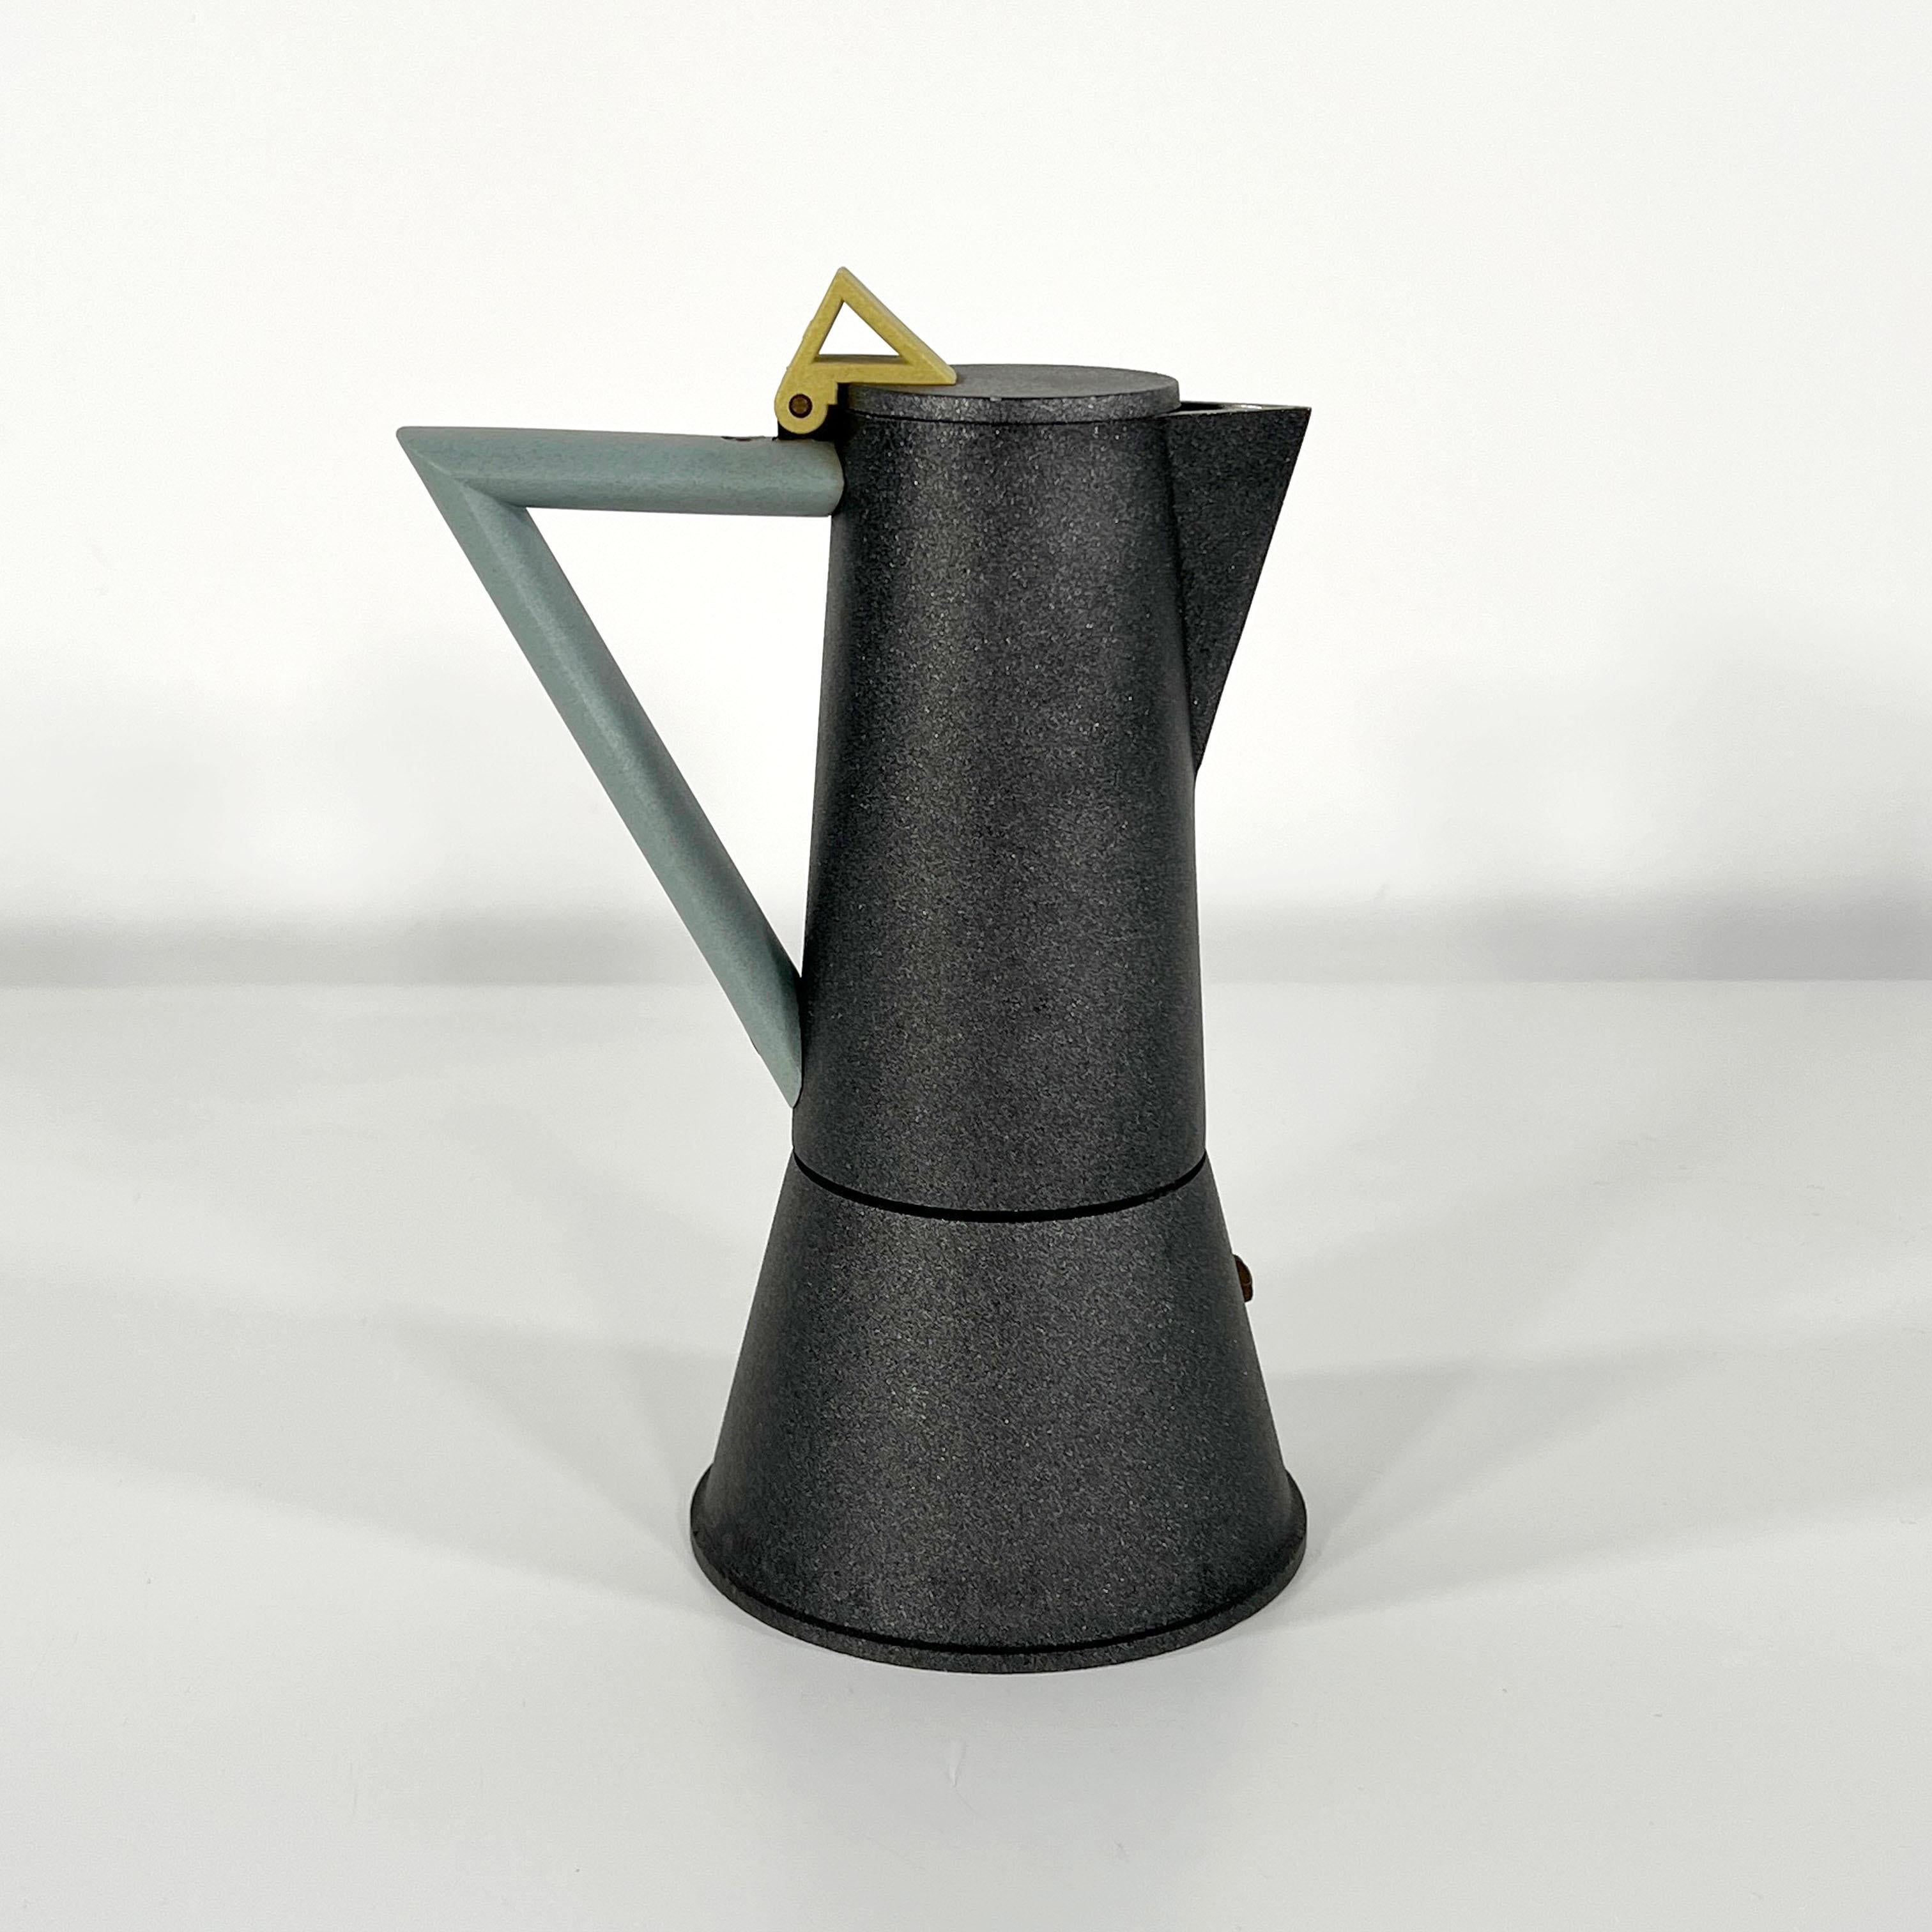 Mid-Century Modern Coffee Maker 'Accademia' Series by Ettore Sottsass for Lagostina, 1980s